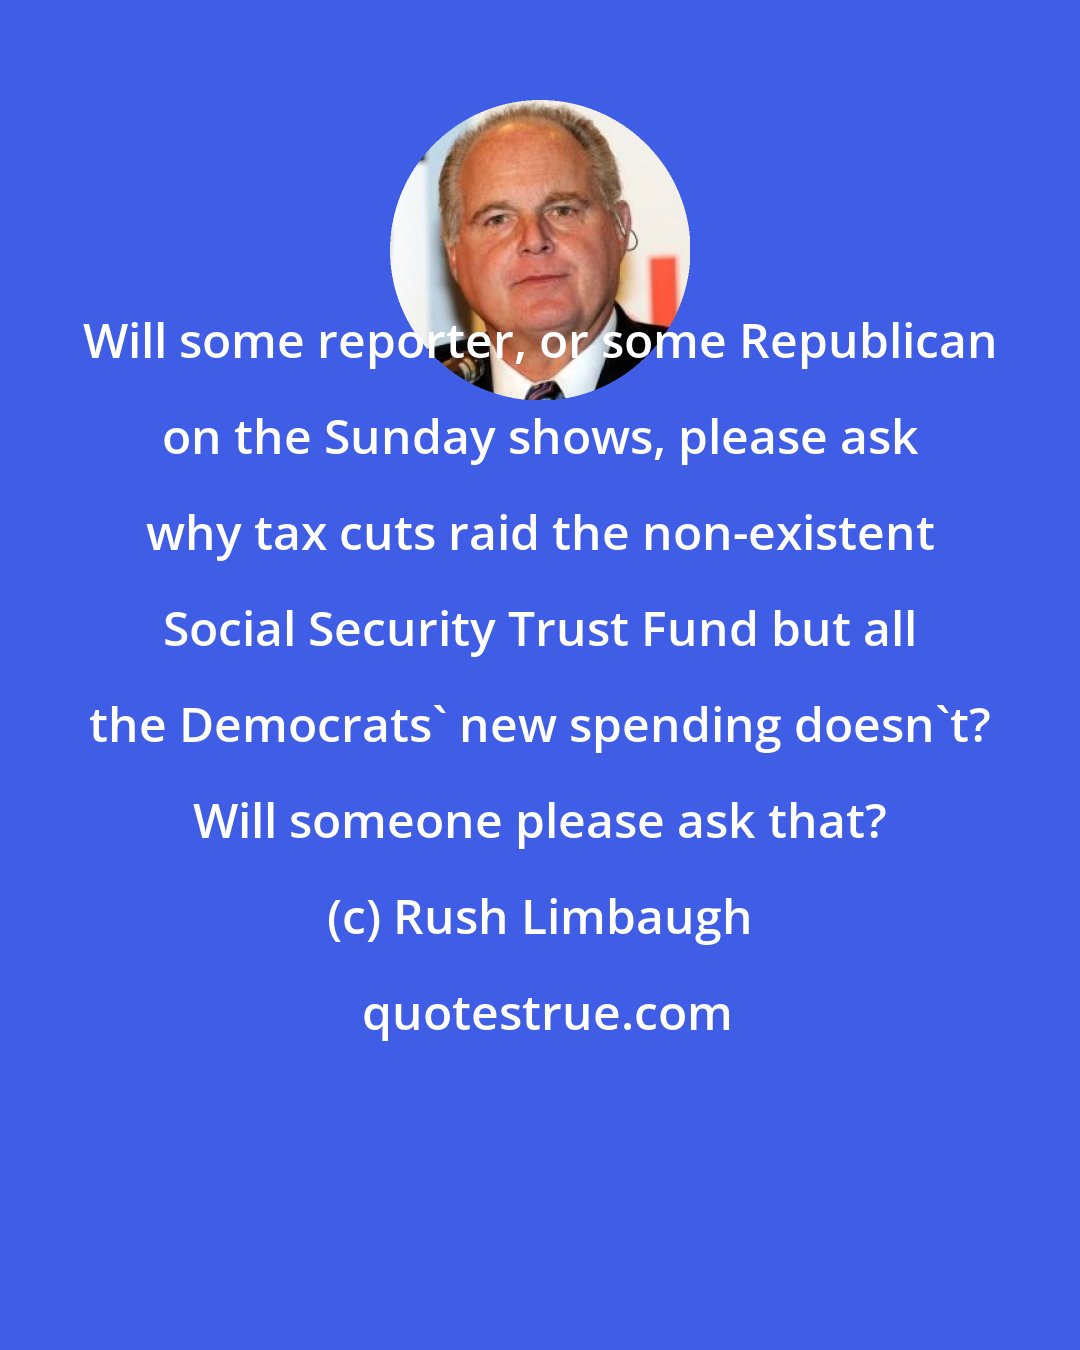 Rush Limbaugh: Will some reporter, or some Republican on the Sunday shows, please ask why tax cuts raid the non-existent Social Security Trust Fund but all the Democrats' new spending doesn't? Will someone please ask that?